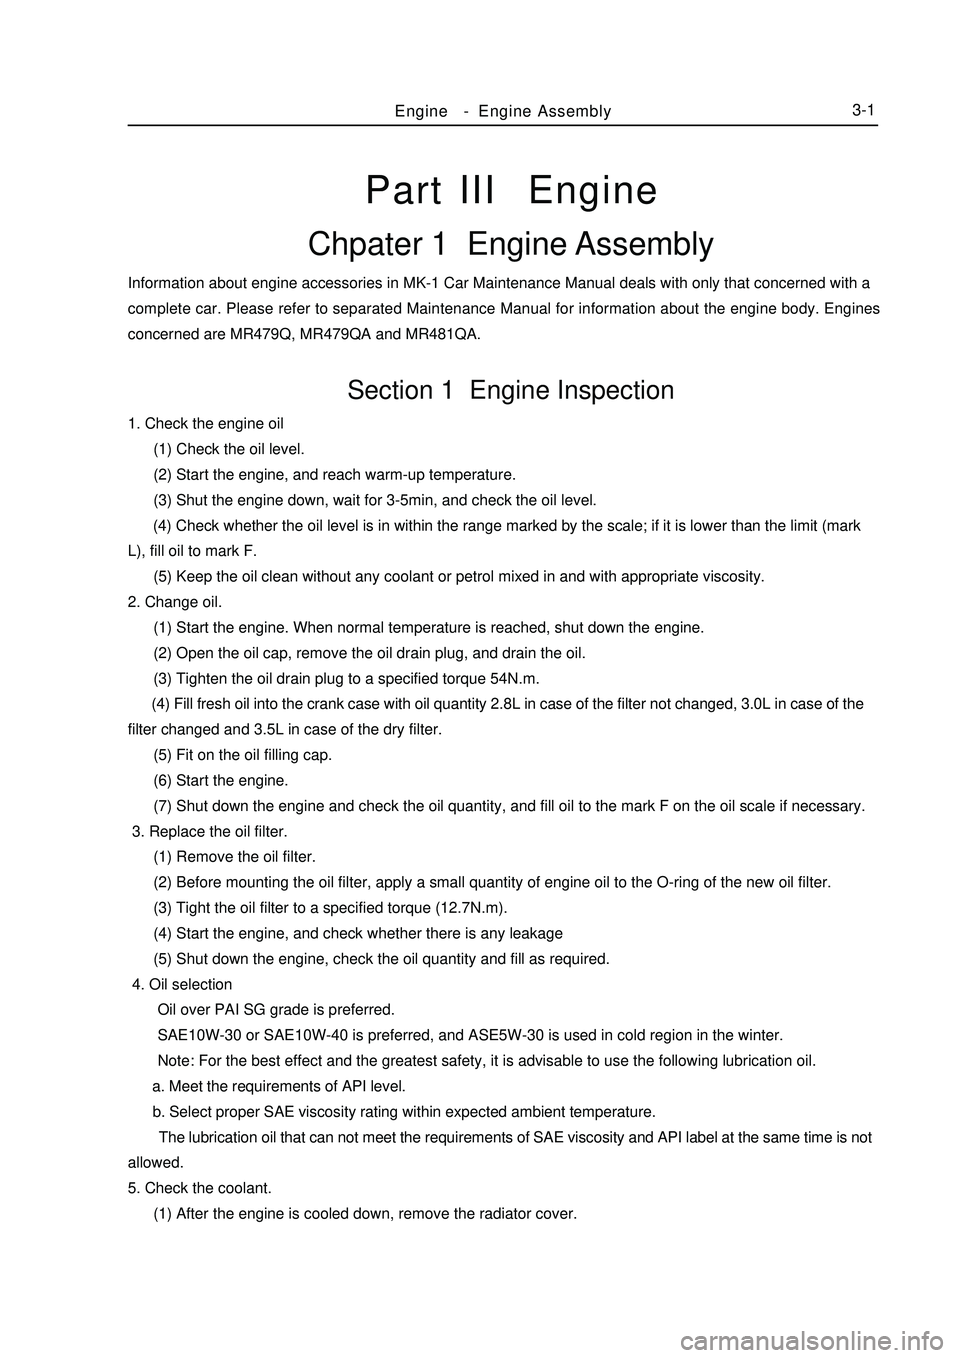 GEELY MK 2008  Workshop Manual Part III  EngineChpater 1  Engine AssemblyInformation about engine accessories in MK-1 Car Maintenance Manual deals with only that concerned with a
complete car. Please refer to separated Maintenance 